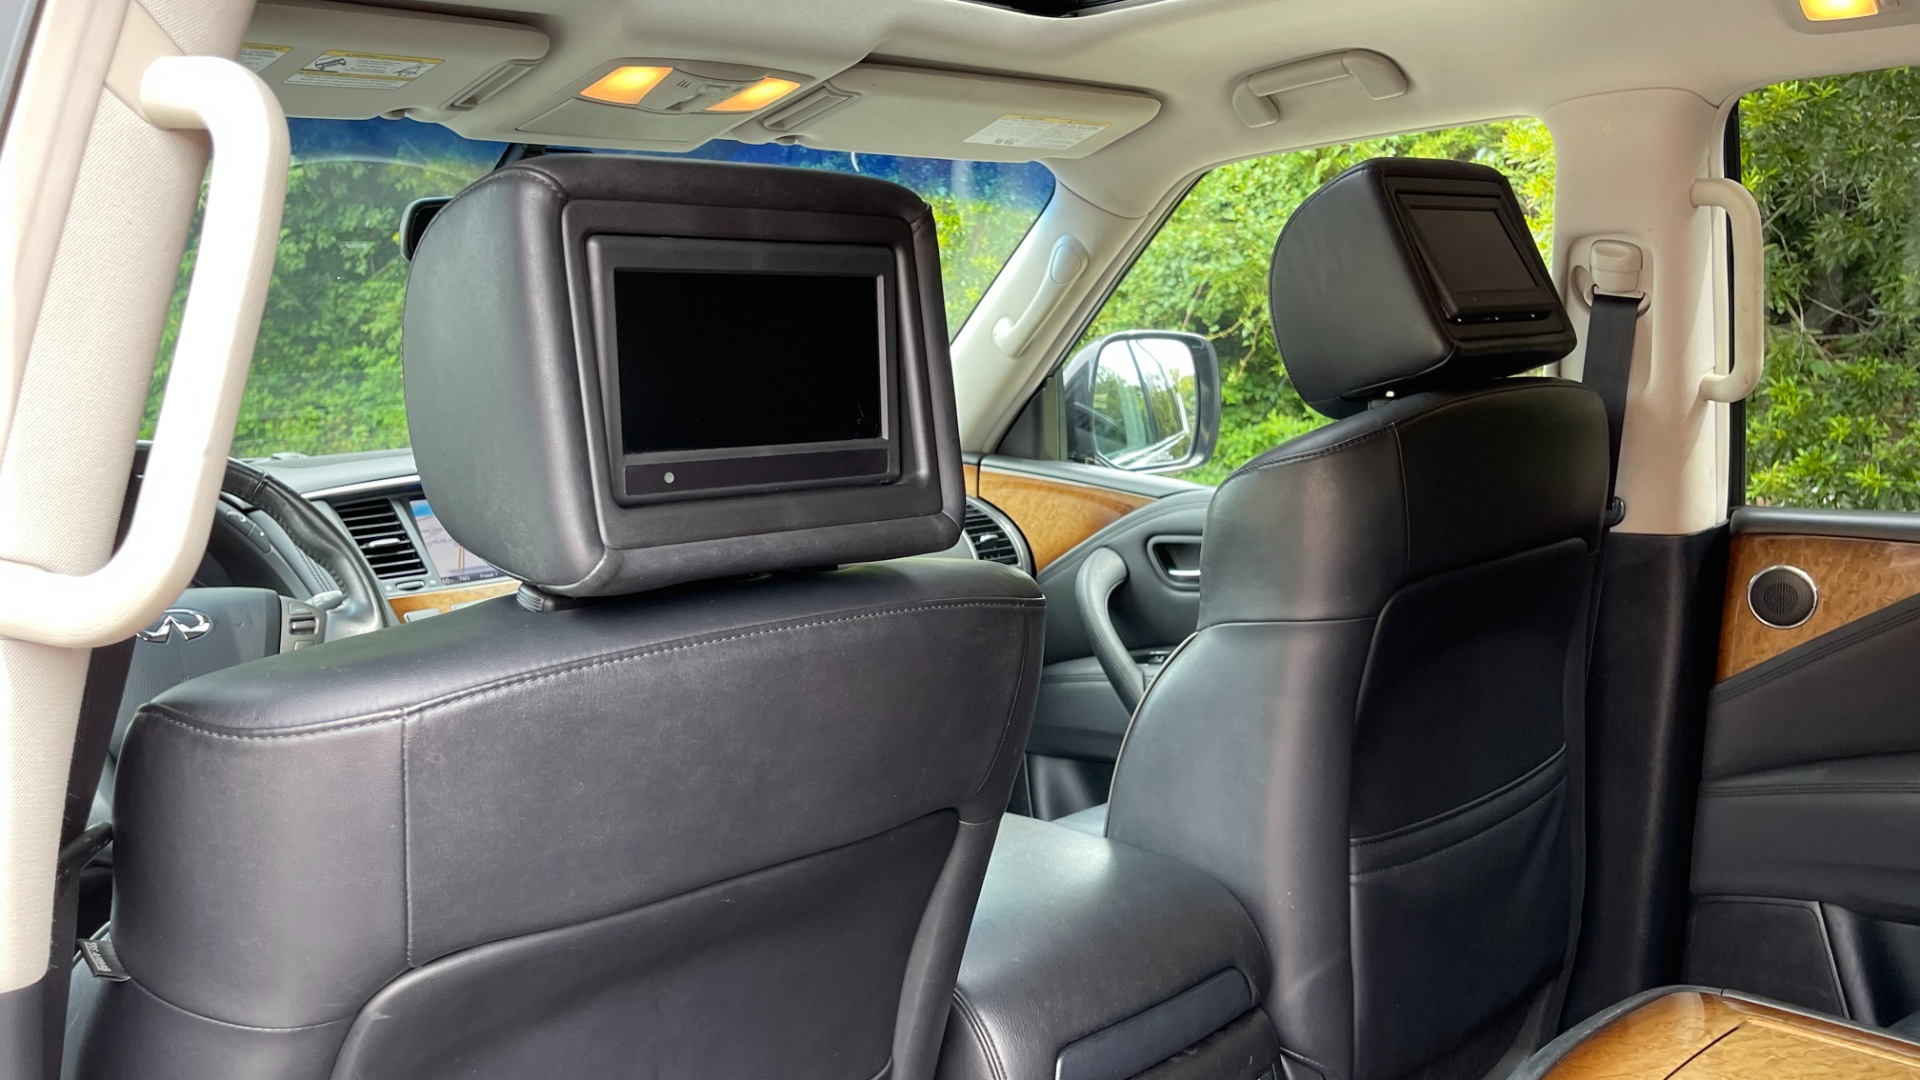 Used 2012 INFINITI QX56 7 PASSENGER / THEATER PACKAGE / HEATED SEATS / NAV / REARVIEW for sale $17,900 at Formula Imports in Charlotte NC 28227 35